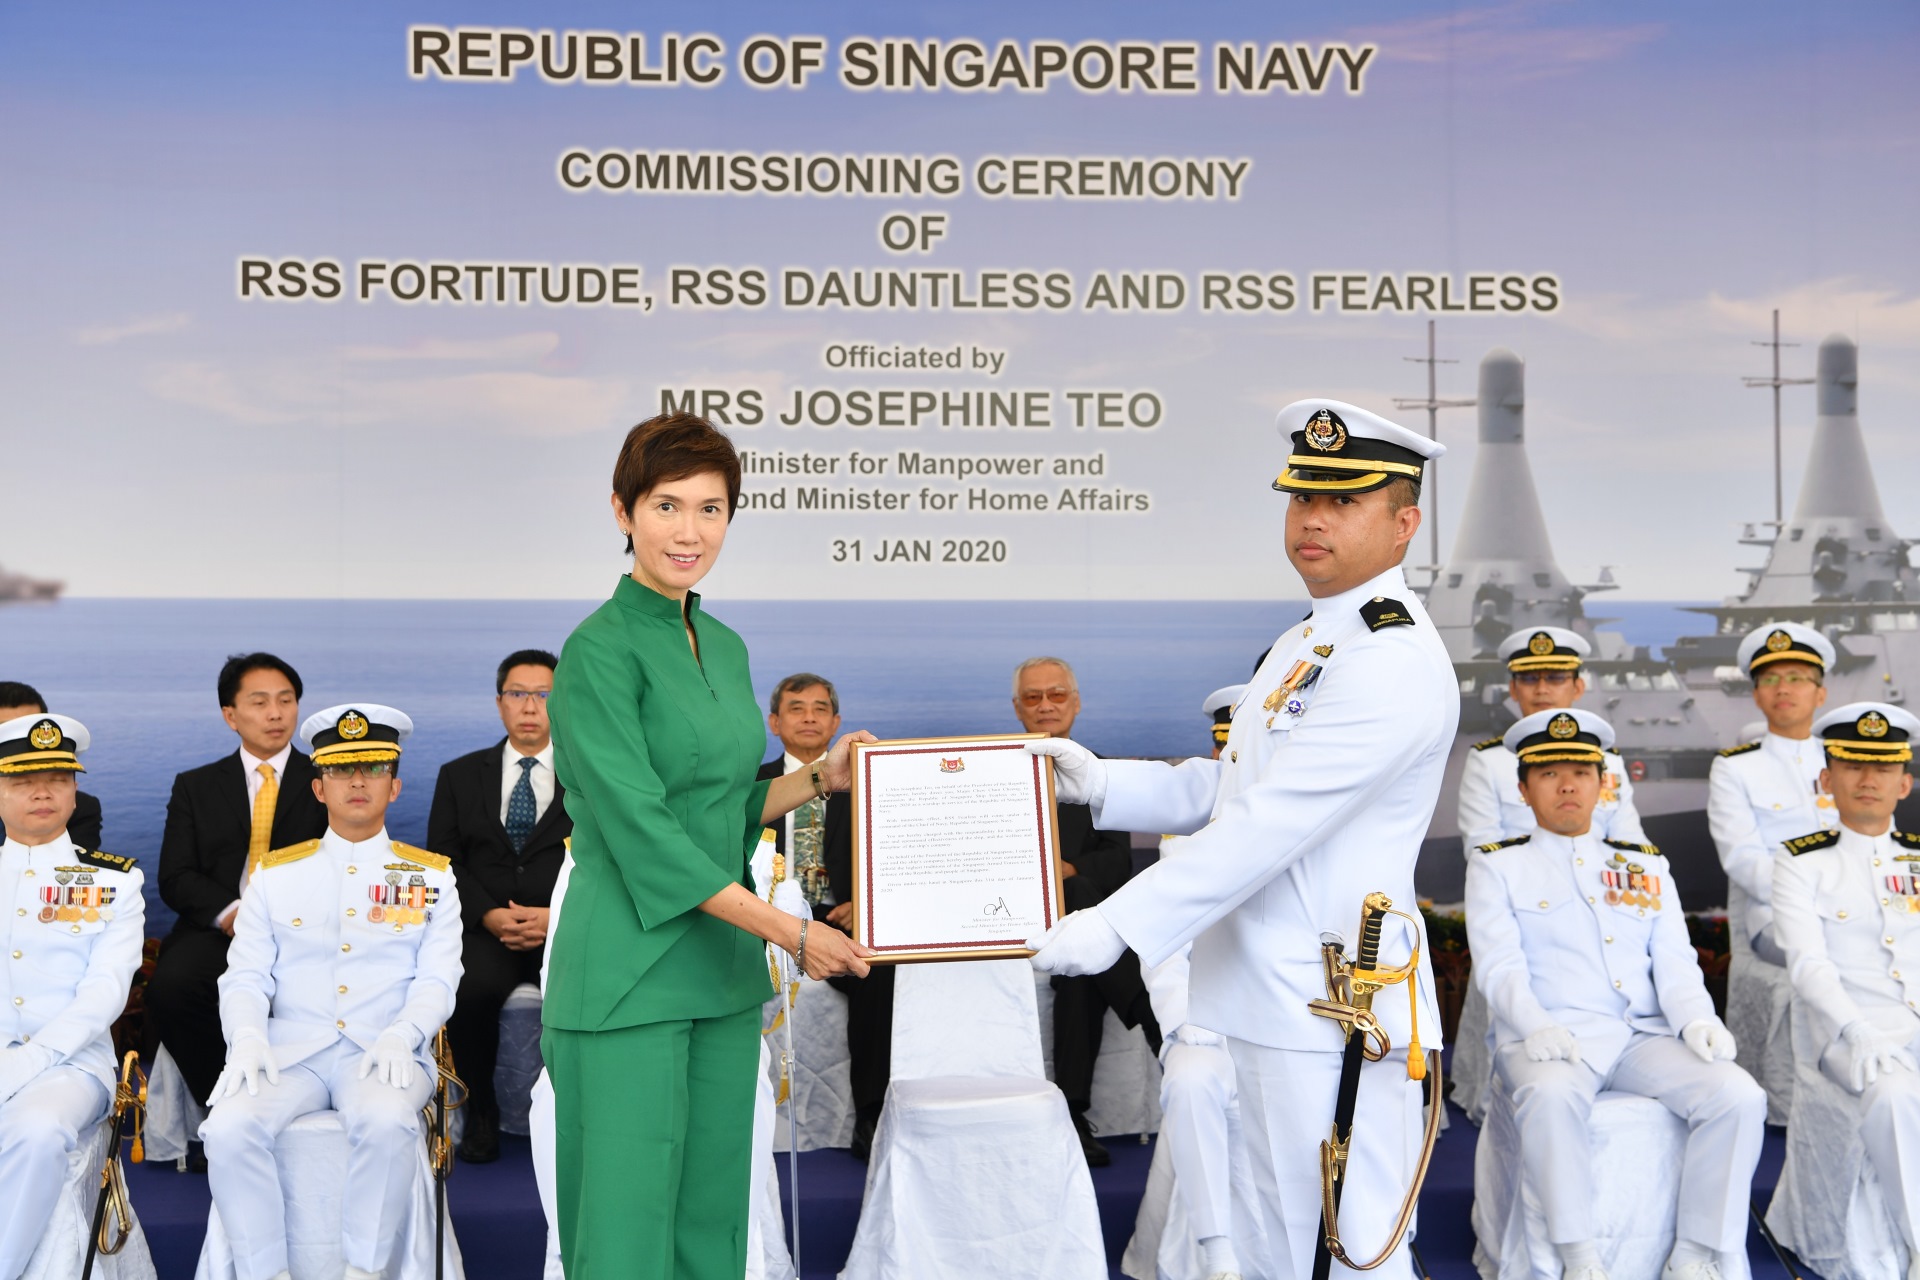 Minister Josephine Teo presenting the Commissioning Warrant to Commanding Officer of RSS Fearless, Major Chew Chun Cheong.